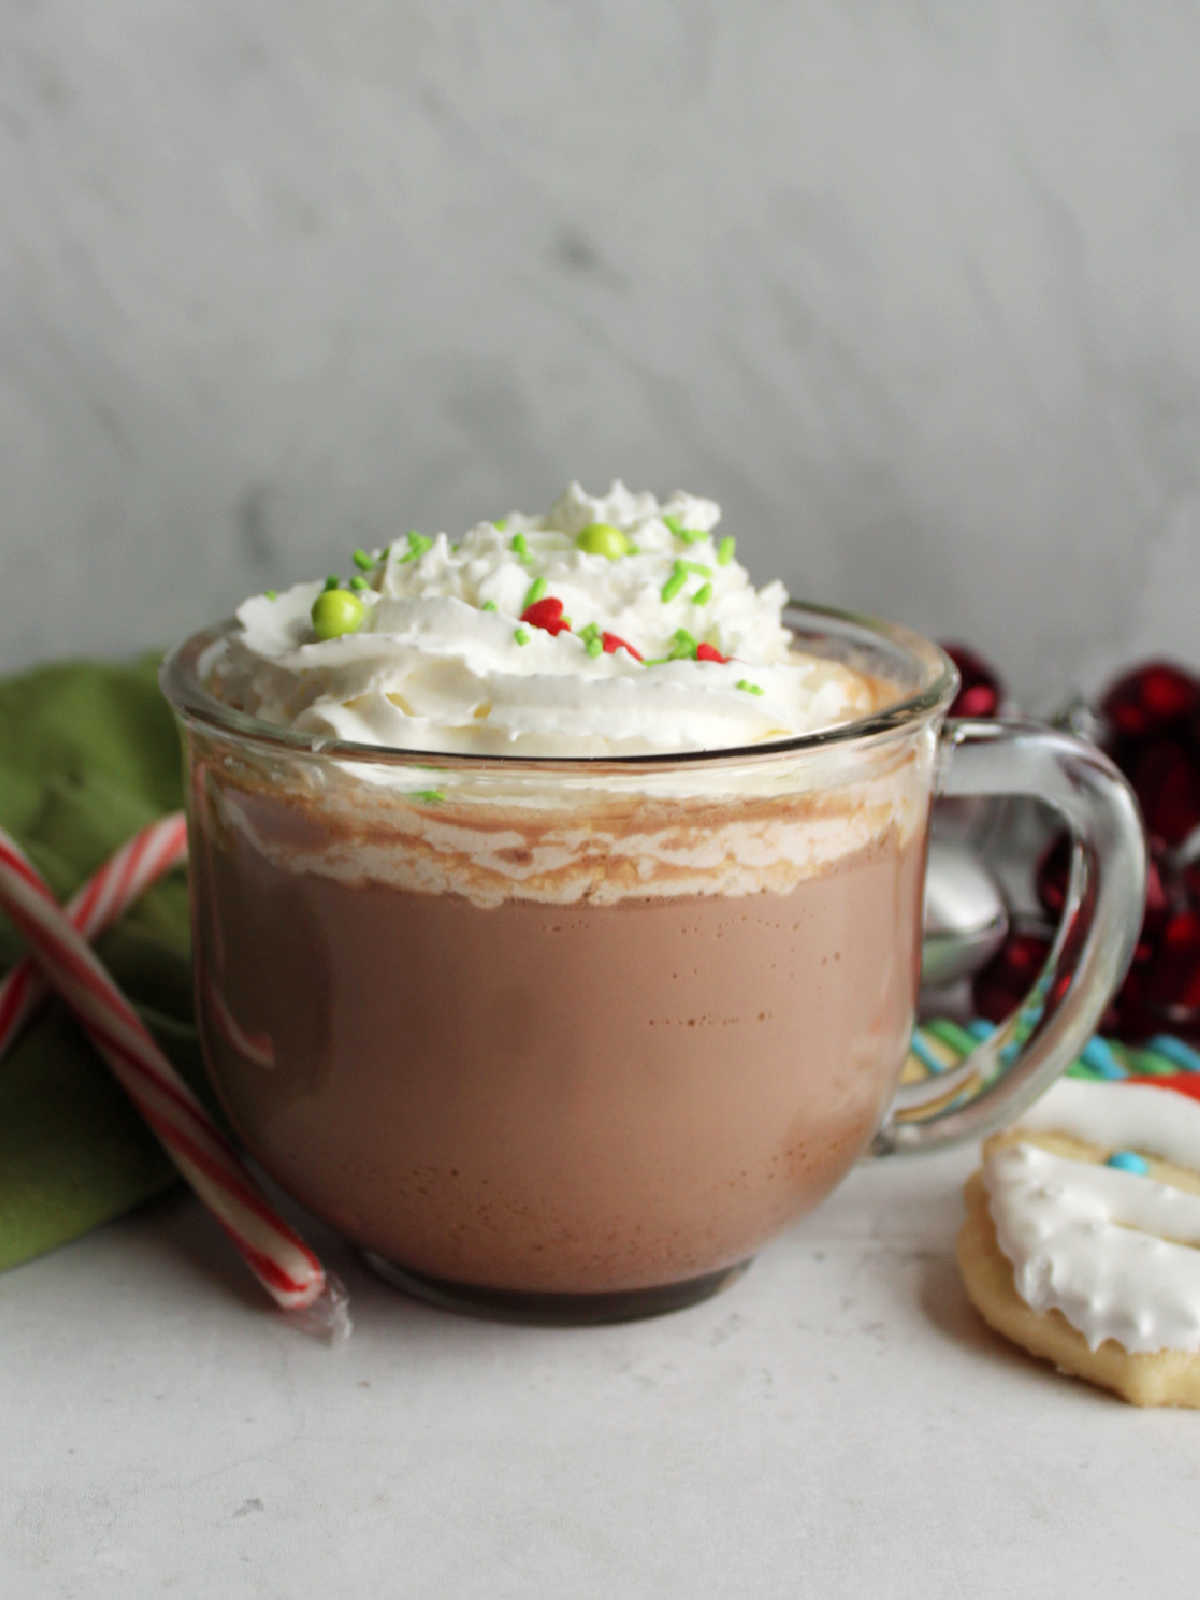 Mug of condensed milk hot chocolate topped with whipped cream served with a decorated sugar cookie and a couple of candy canes.